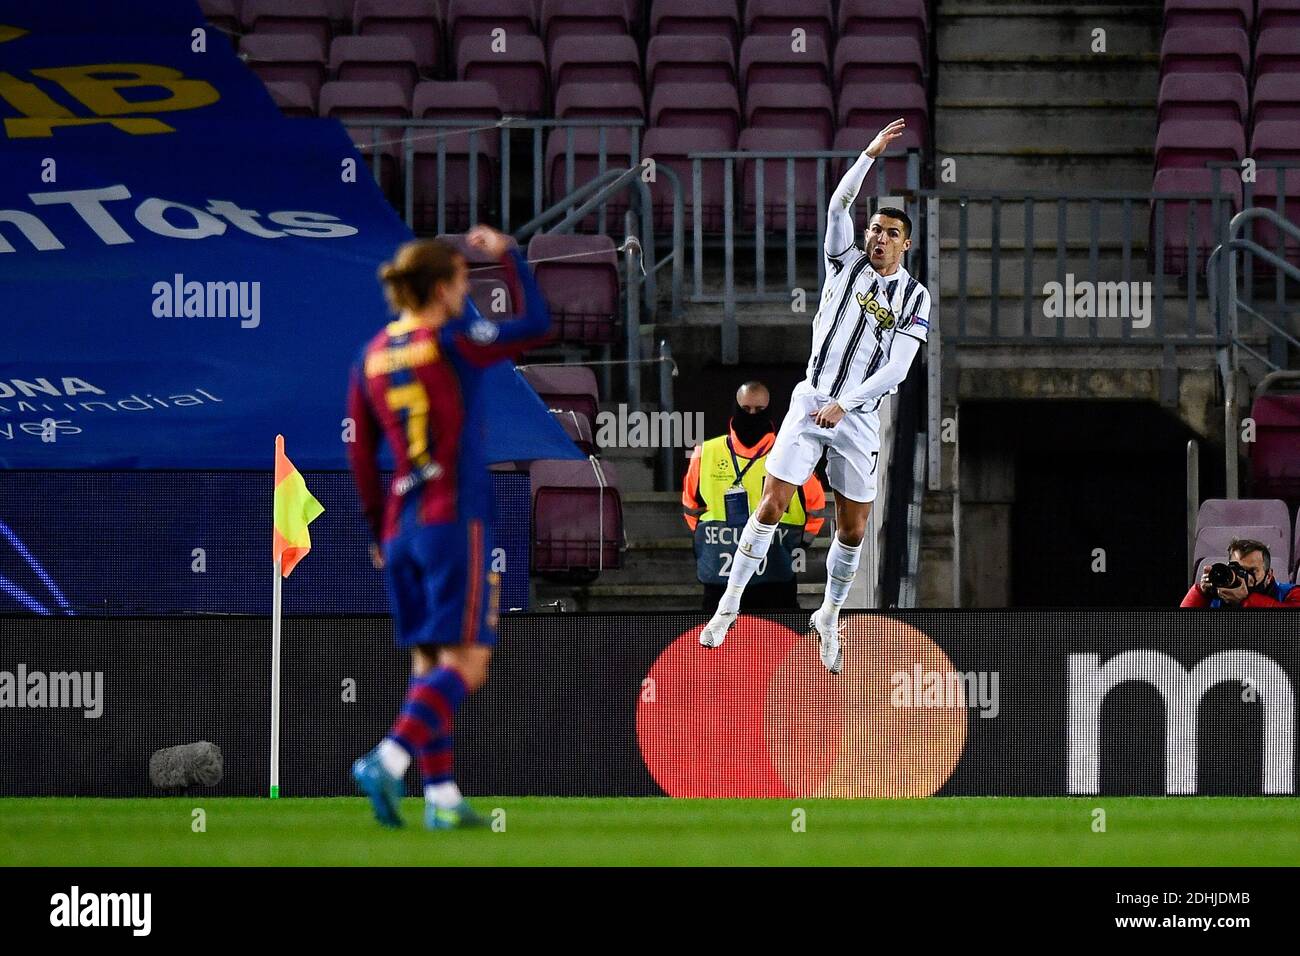 Barcelona, Spain - 08 December, 2020: Cristiano Ronaldo of Juventus FC  celebrates after scoring a goal from a penalty kick during the UEFA  Champions League Group G football match between FC Barcelona